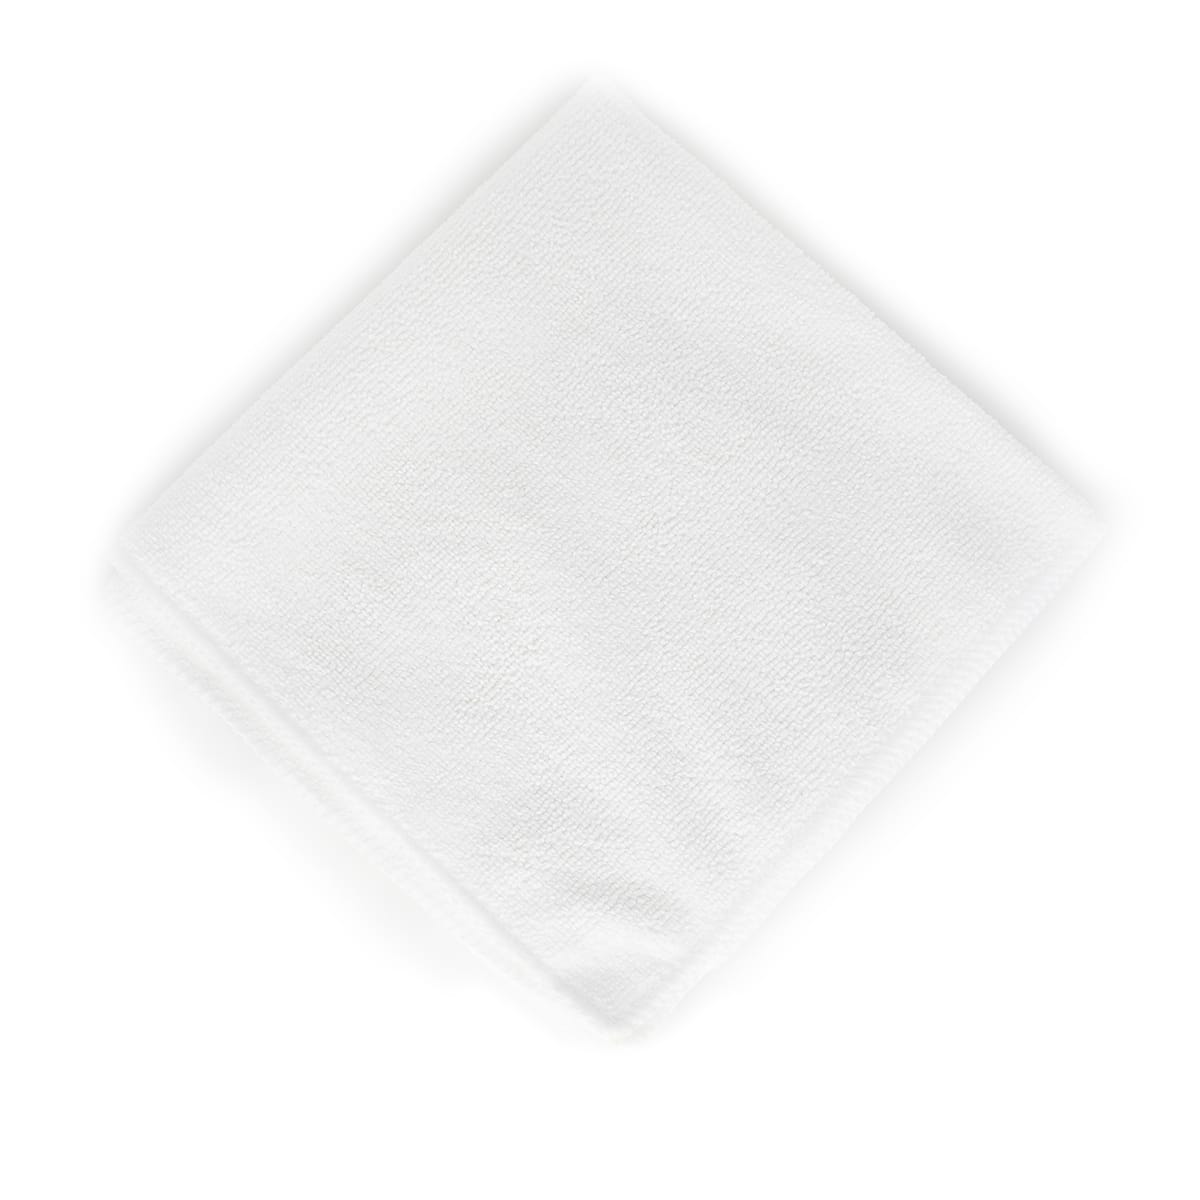 SoCal Wax Gold/Silver 400 GSM Microfiber Towel (10 pack)